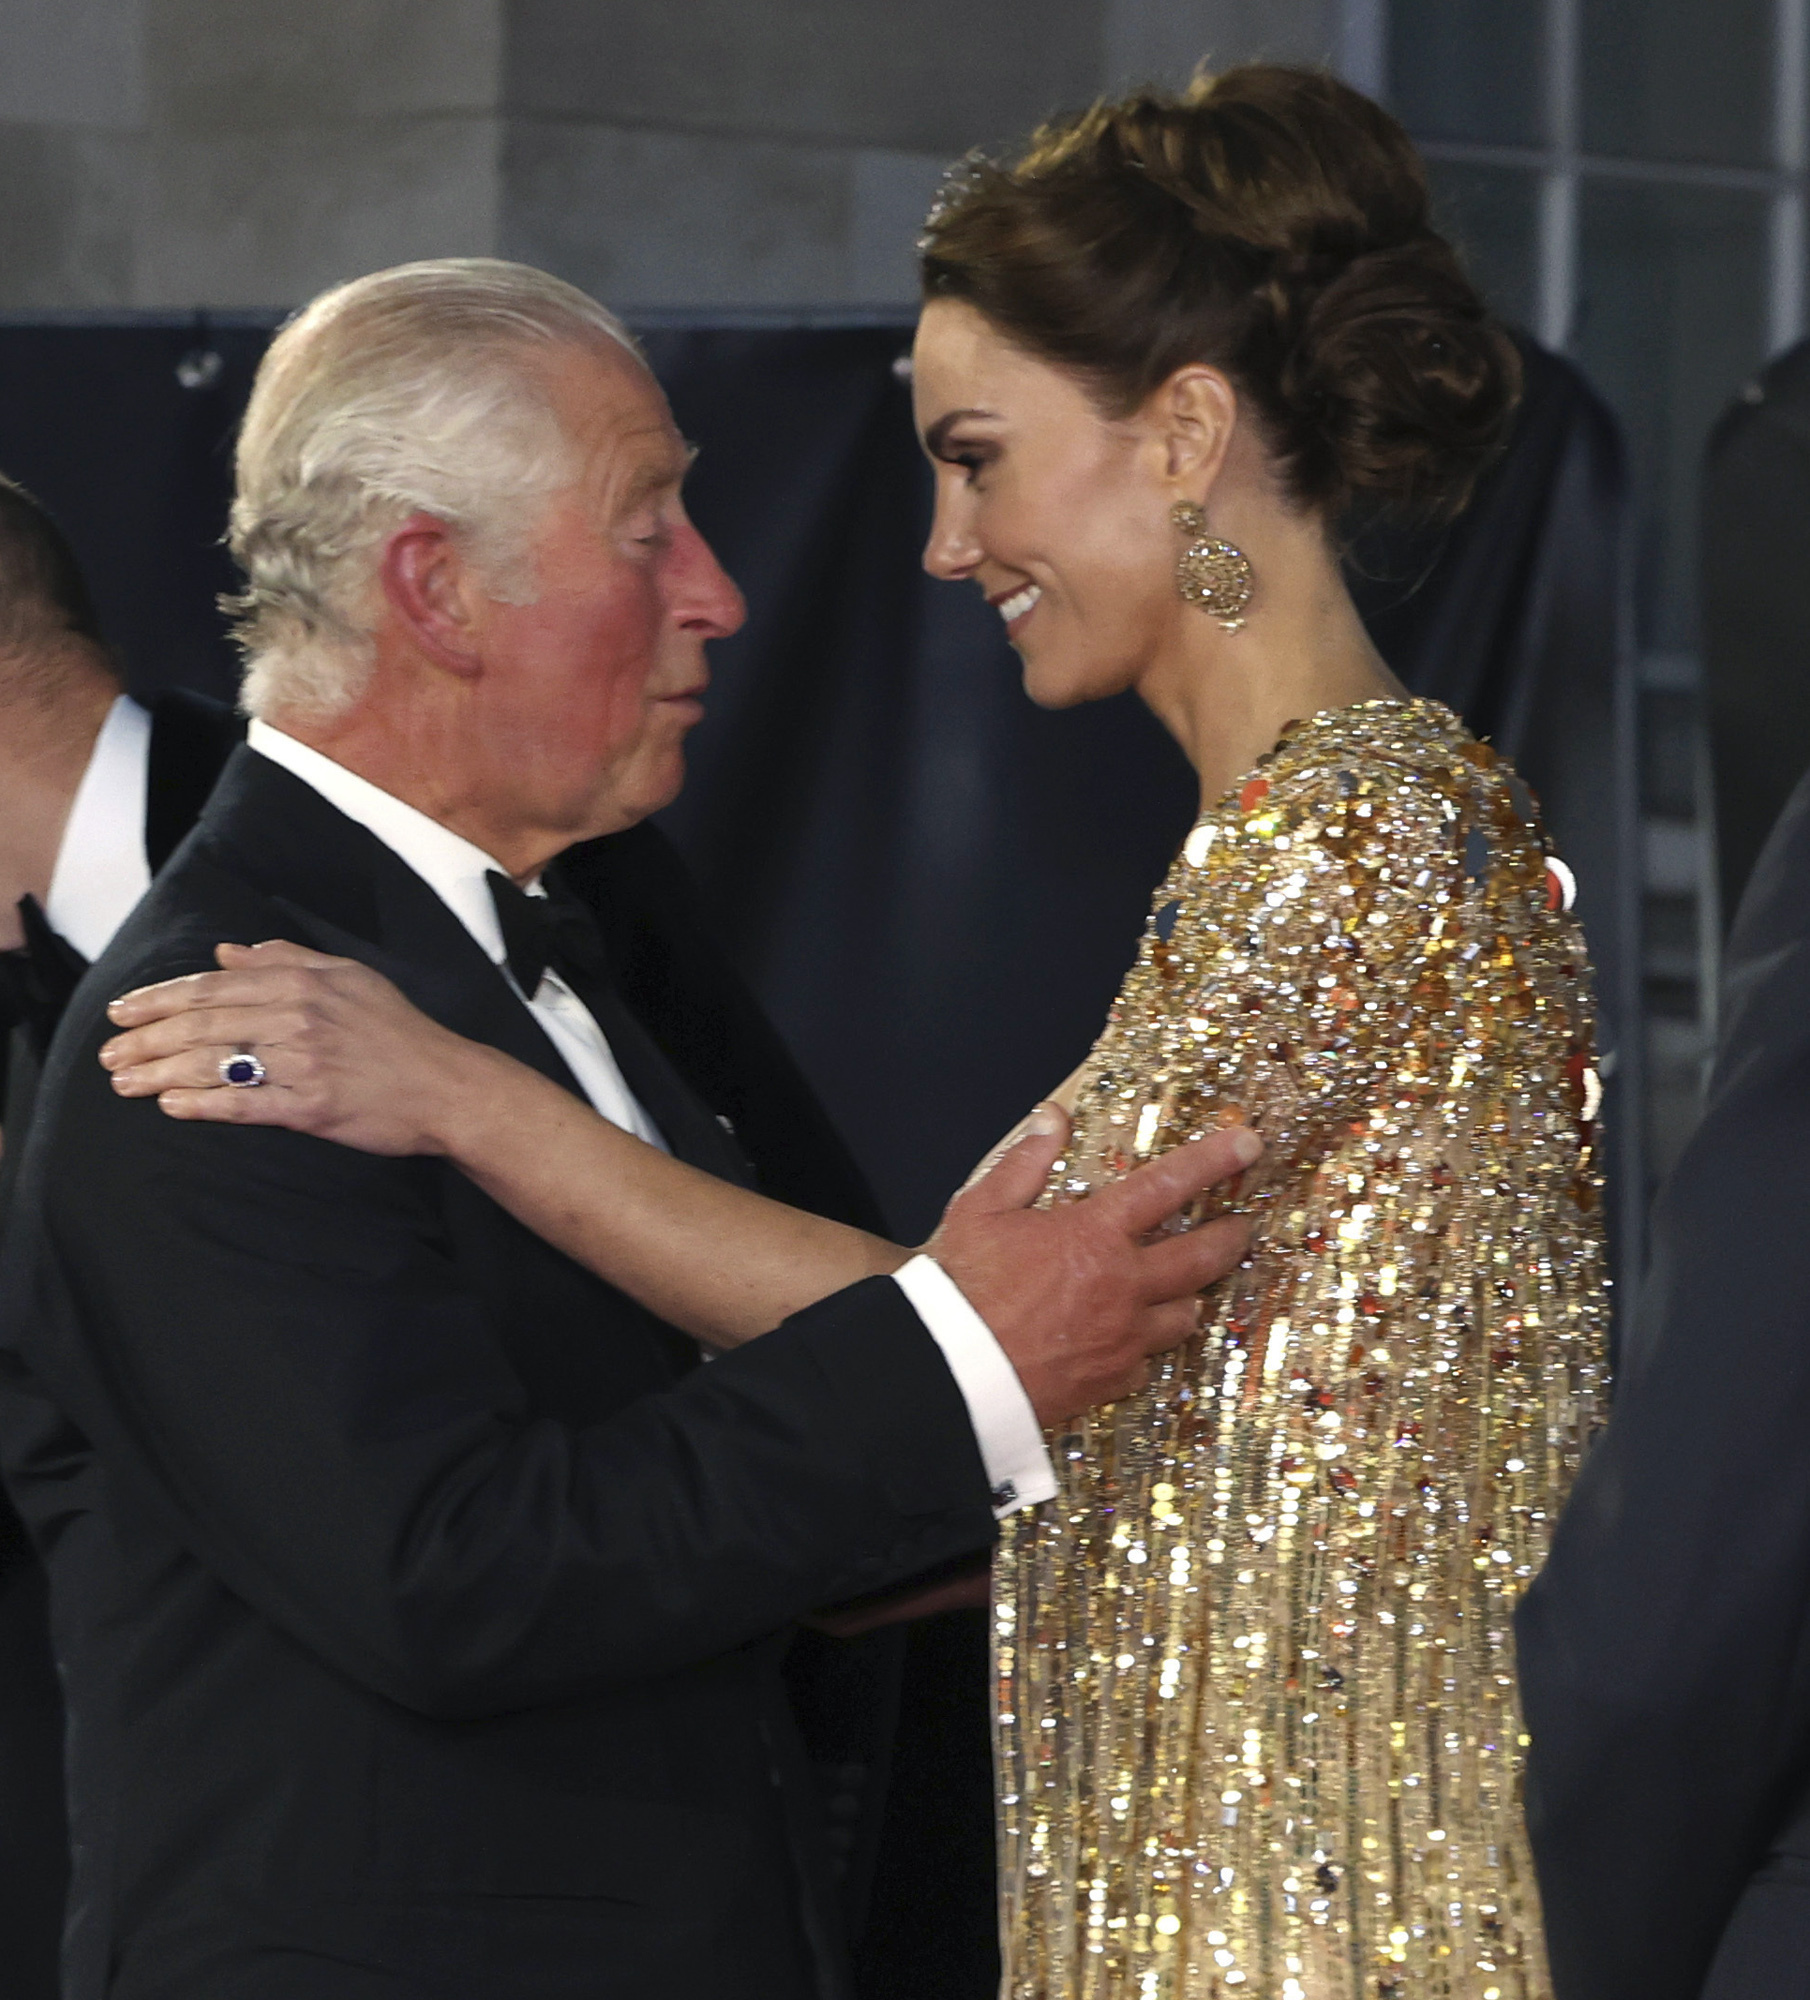 It is the second cancer blow to the Royal Family after Charles was also diagnosed